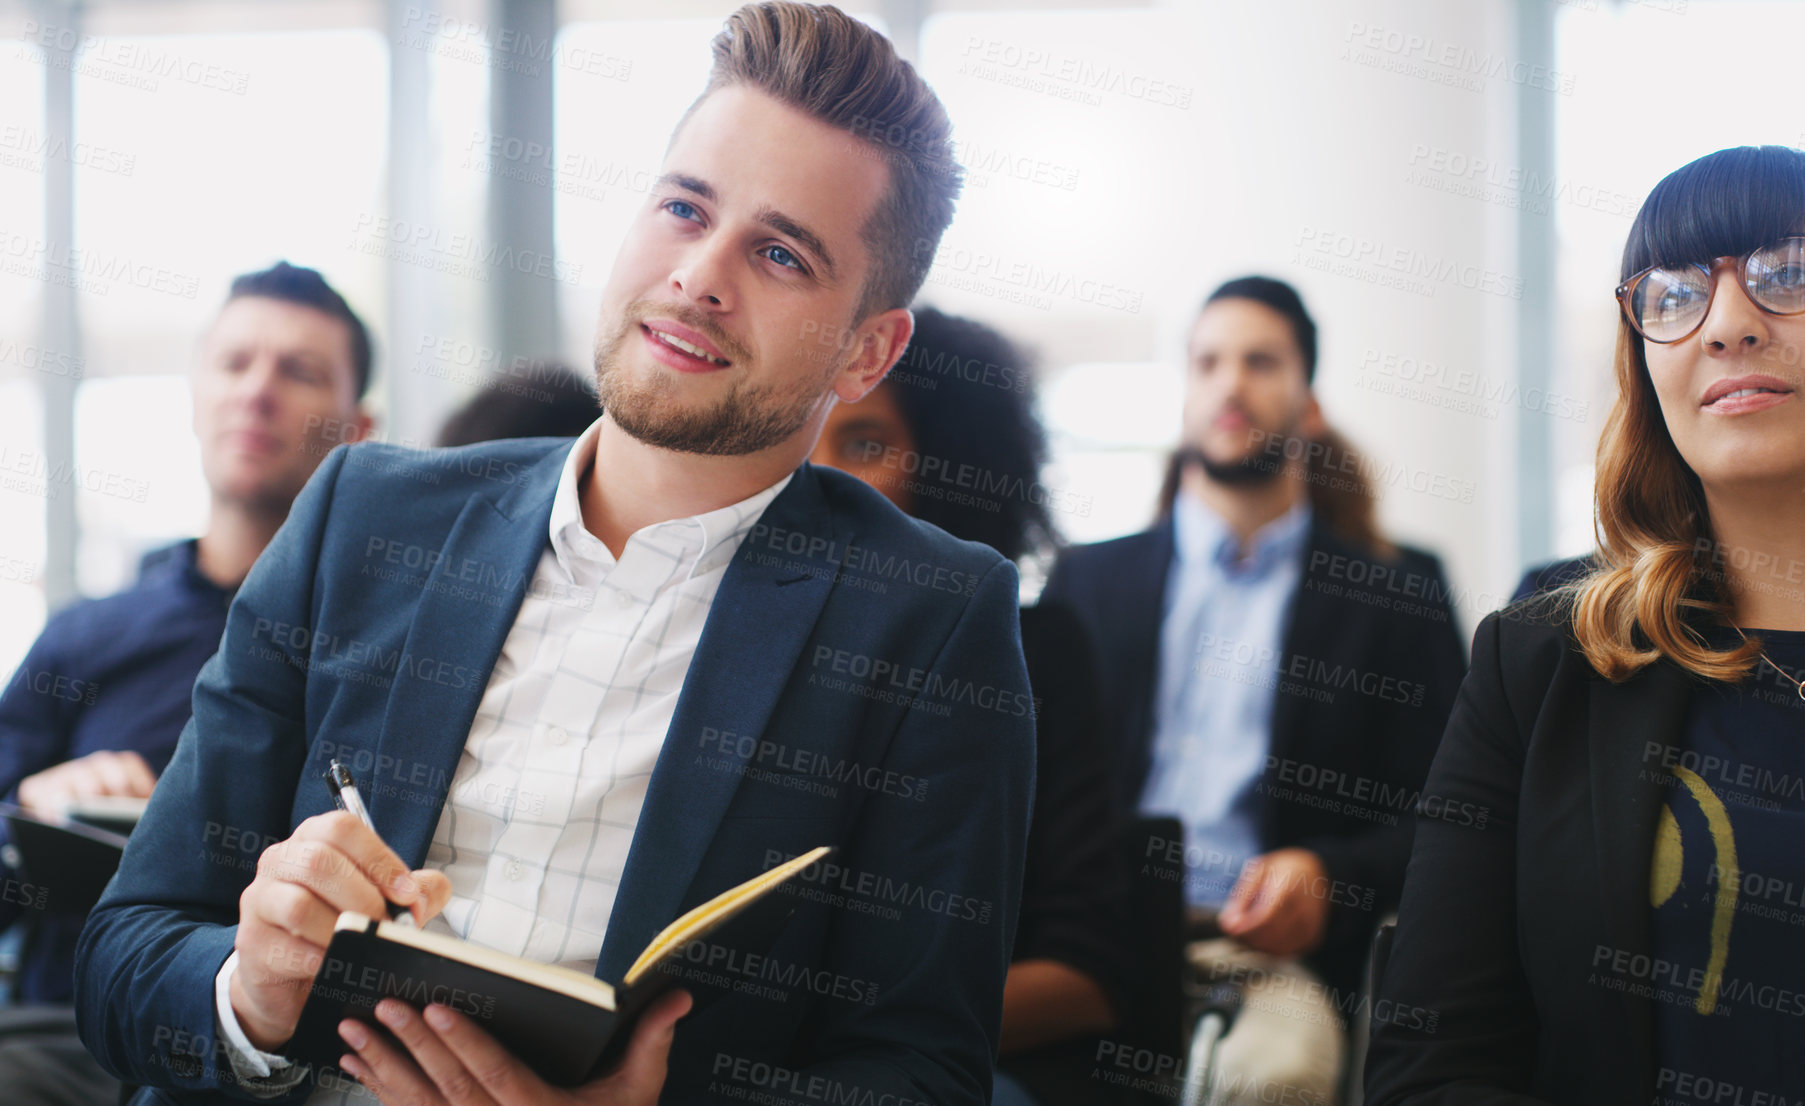 Buy stock photo Shot of a young businessman taking down notes while sitting in the audience of a business conference